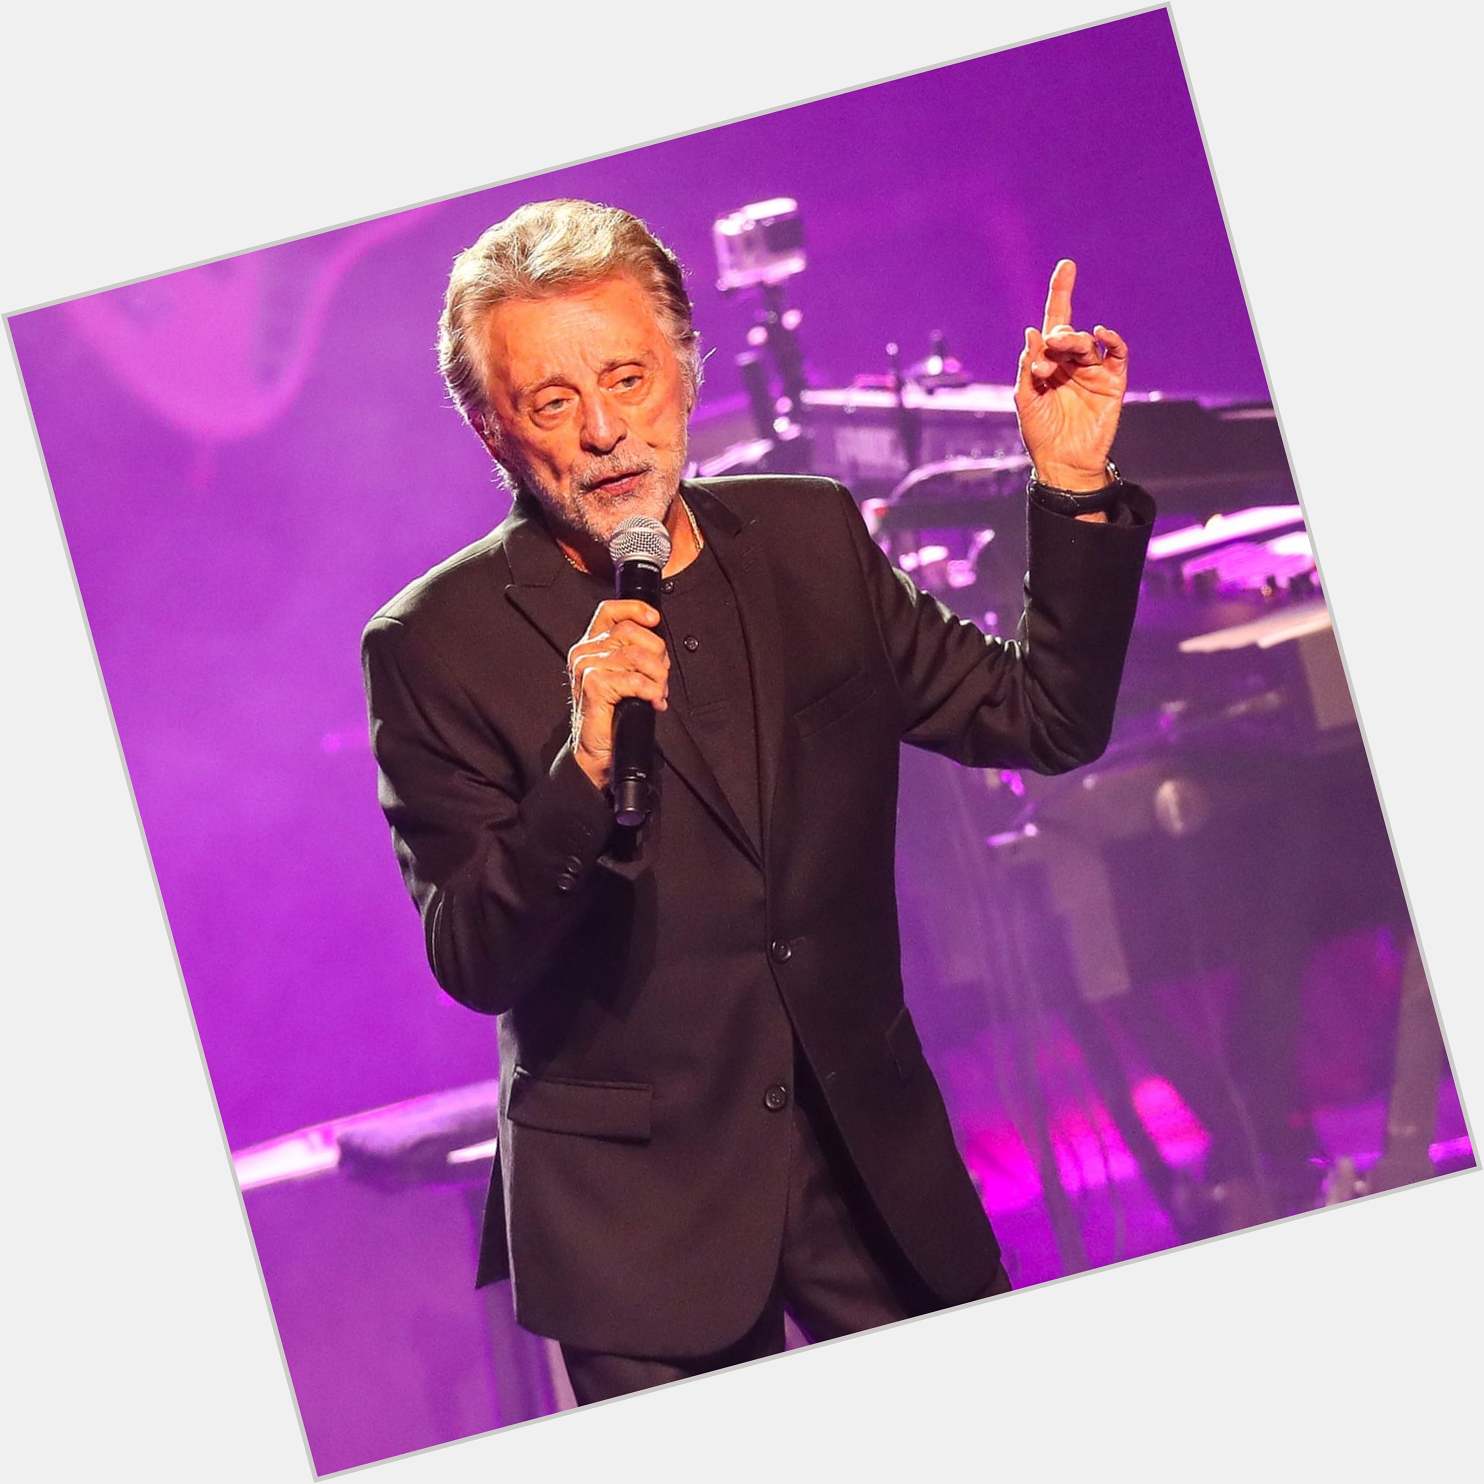 Happy Birthday Mr. Frankie Valli!!
I adore your voice so much.
Look forward to your tour this summer. 